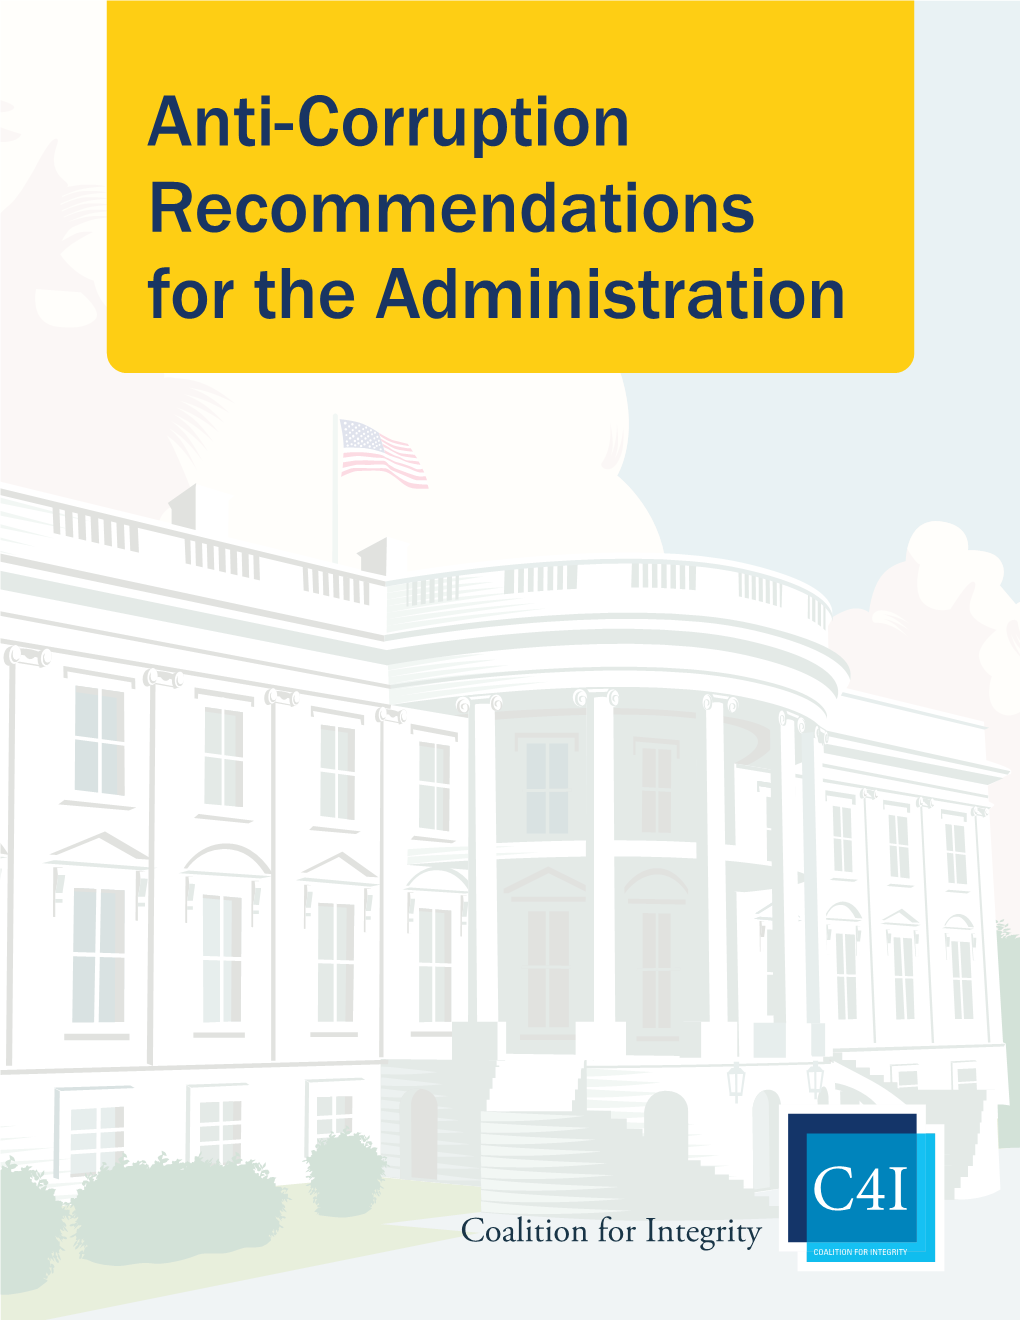 Anti-Corruption Recommendations for the Biden Administration